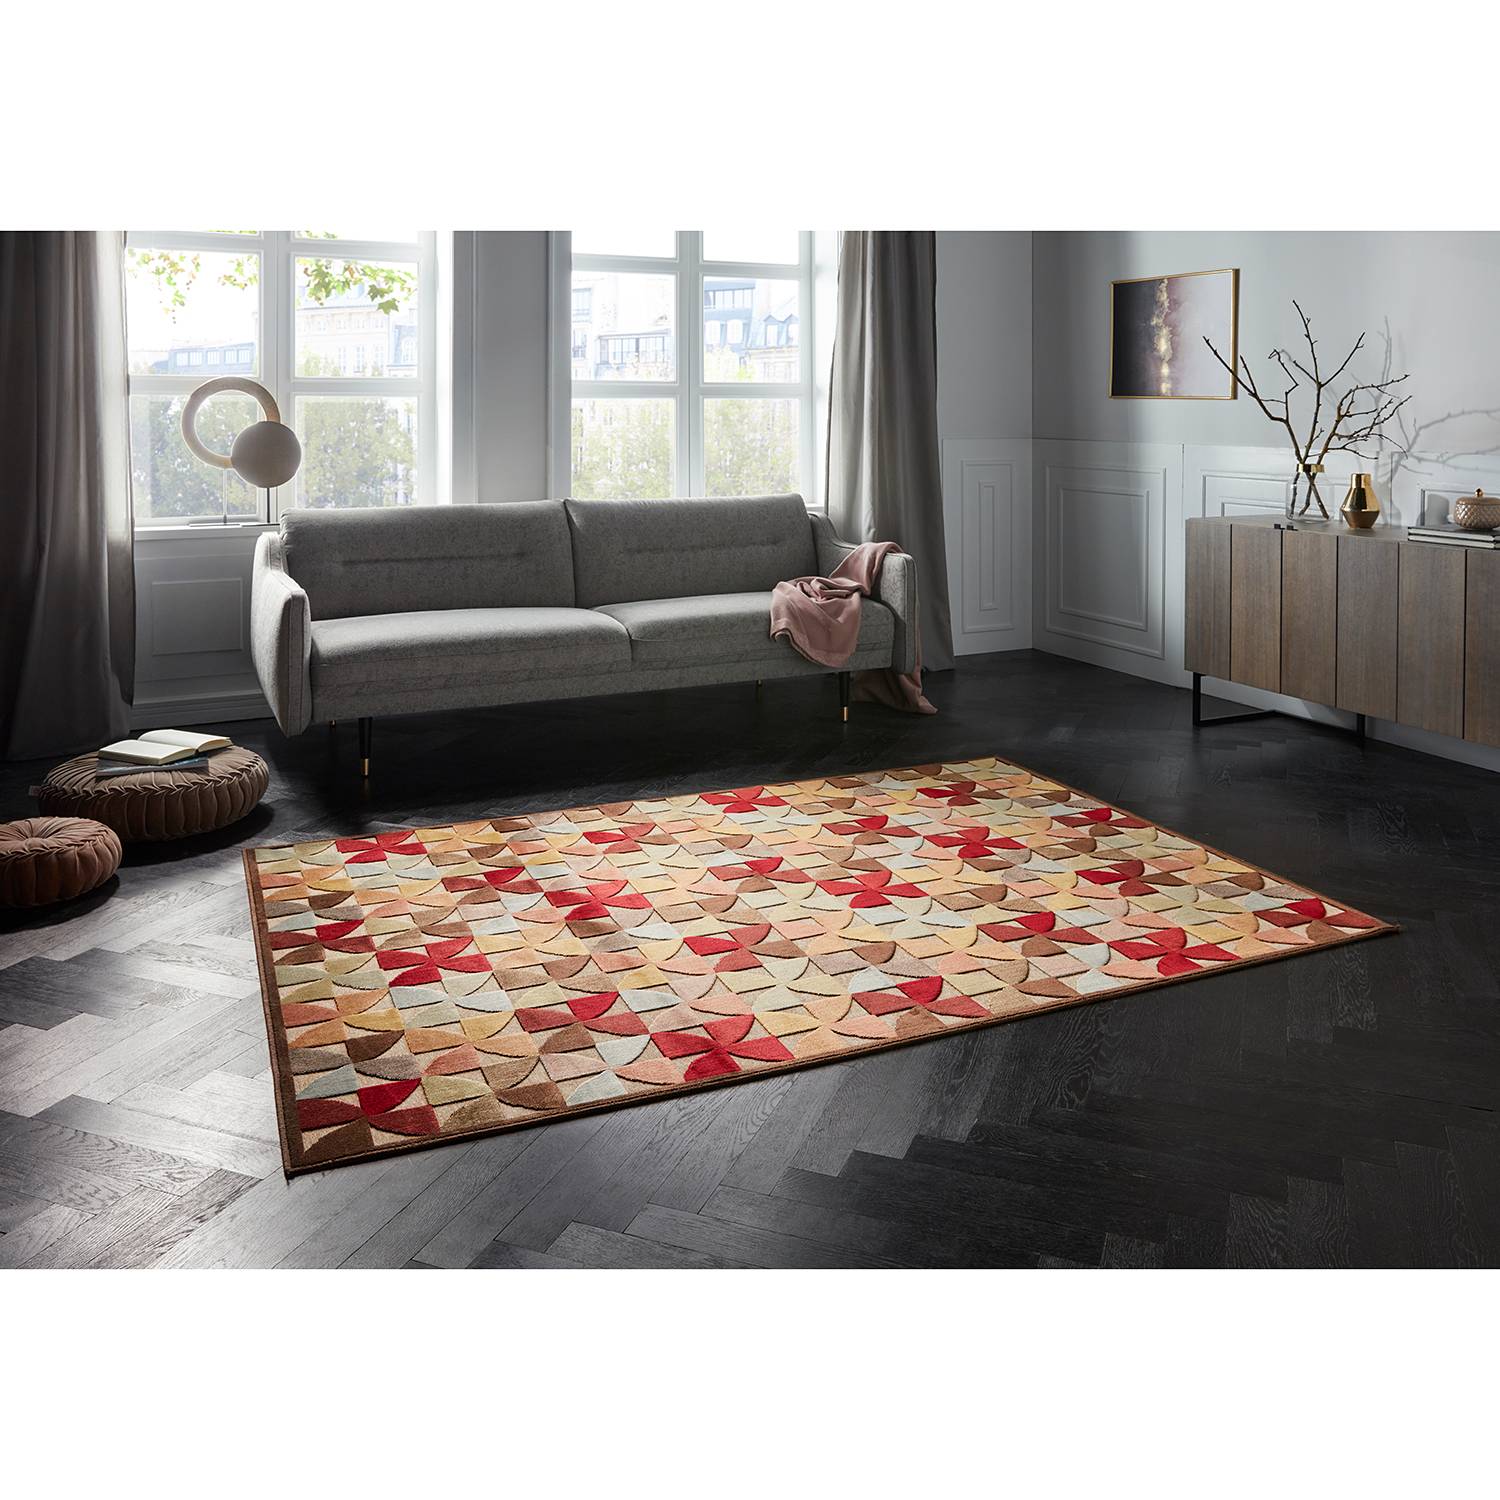 Image of Tapis Ailette 000000001000193681